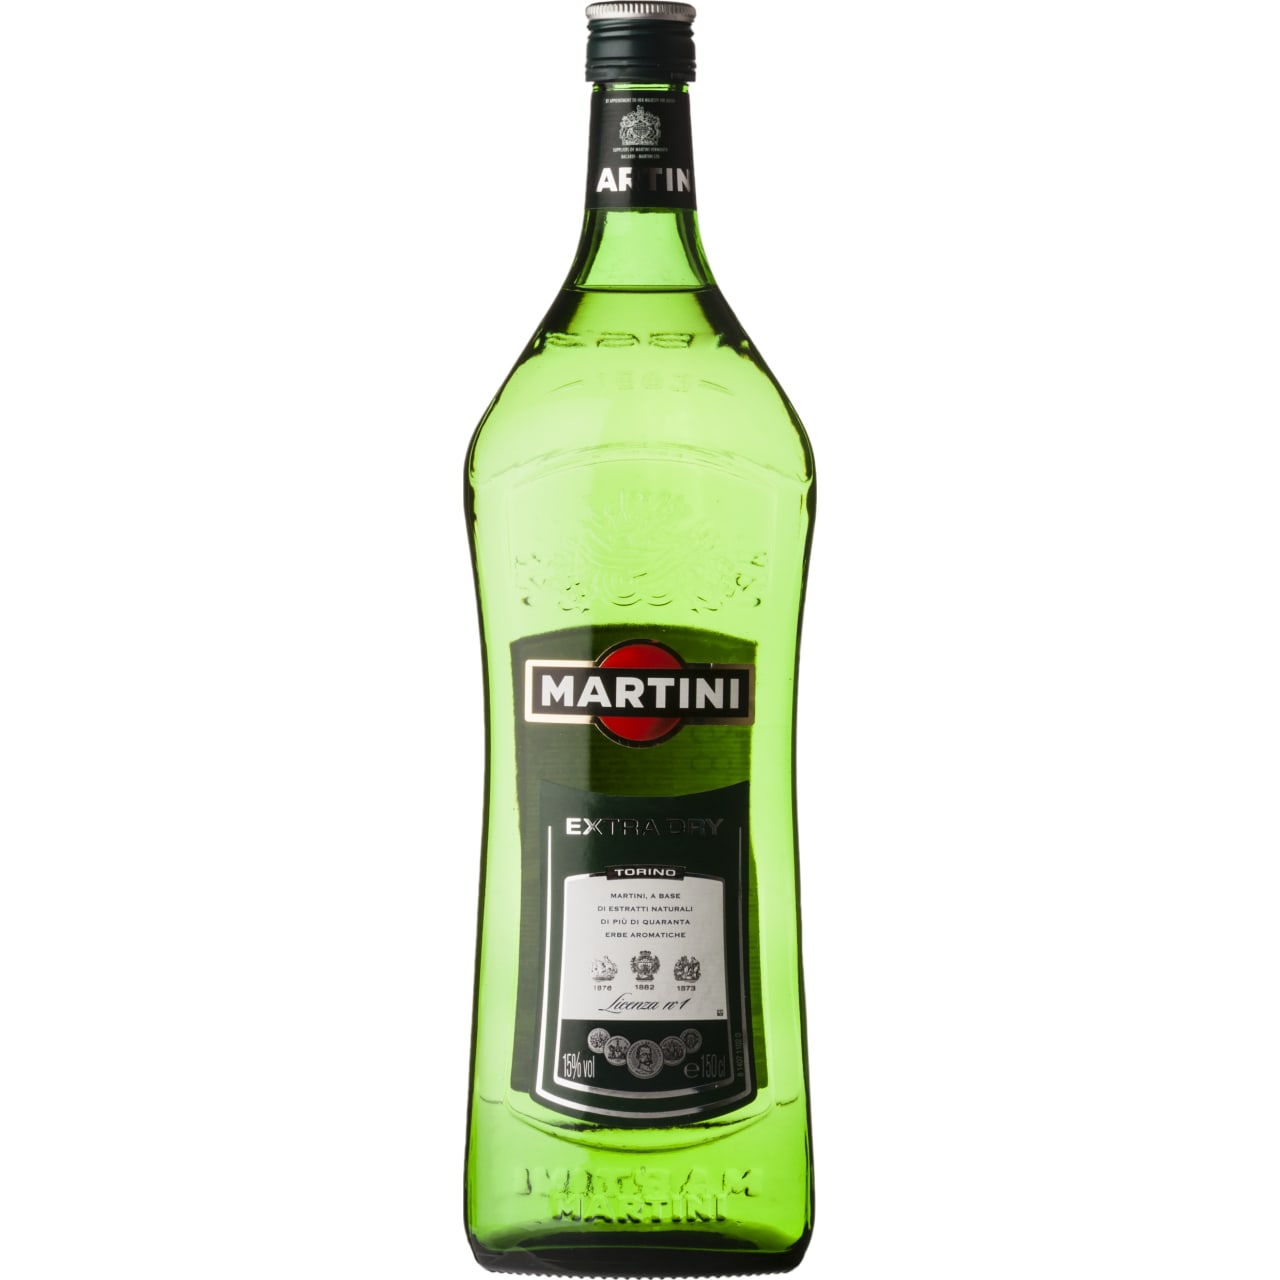 Elegant, delicate and very cool, it is the essential ingredient and the perfect mixer. Characterised by its pale colour and fresh and fruity aromas, Martini Extra Dry is delicious over ice with lemonade or apple juice.